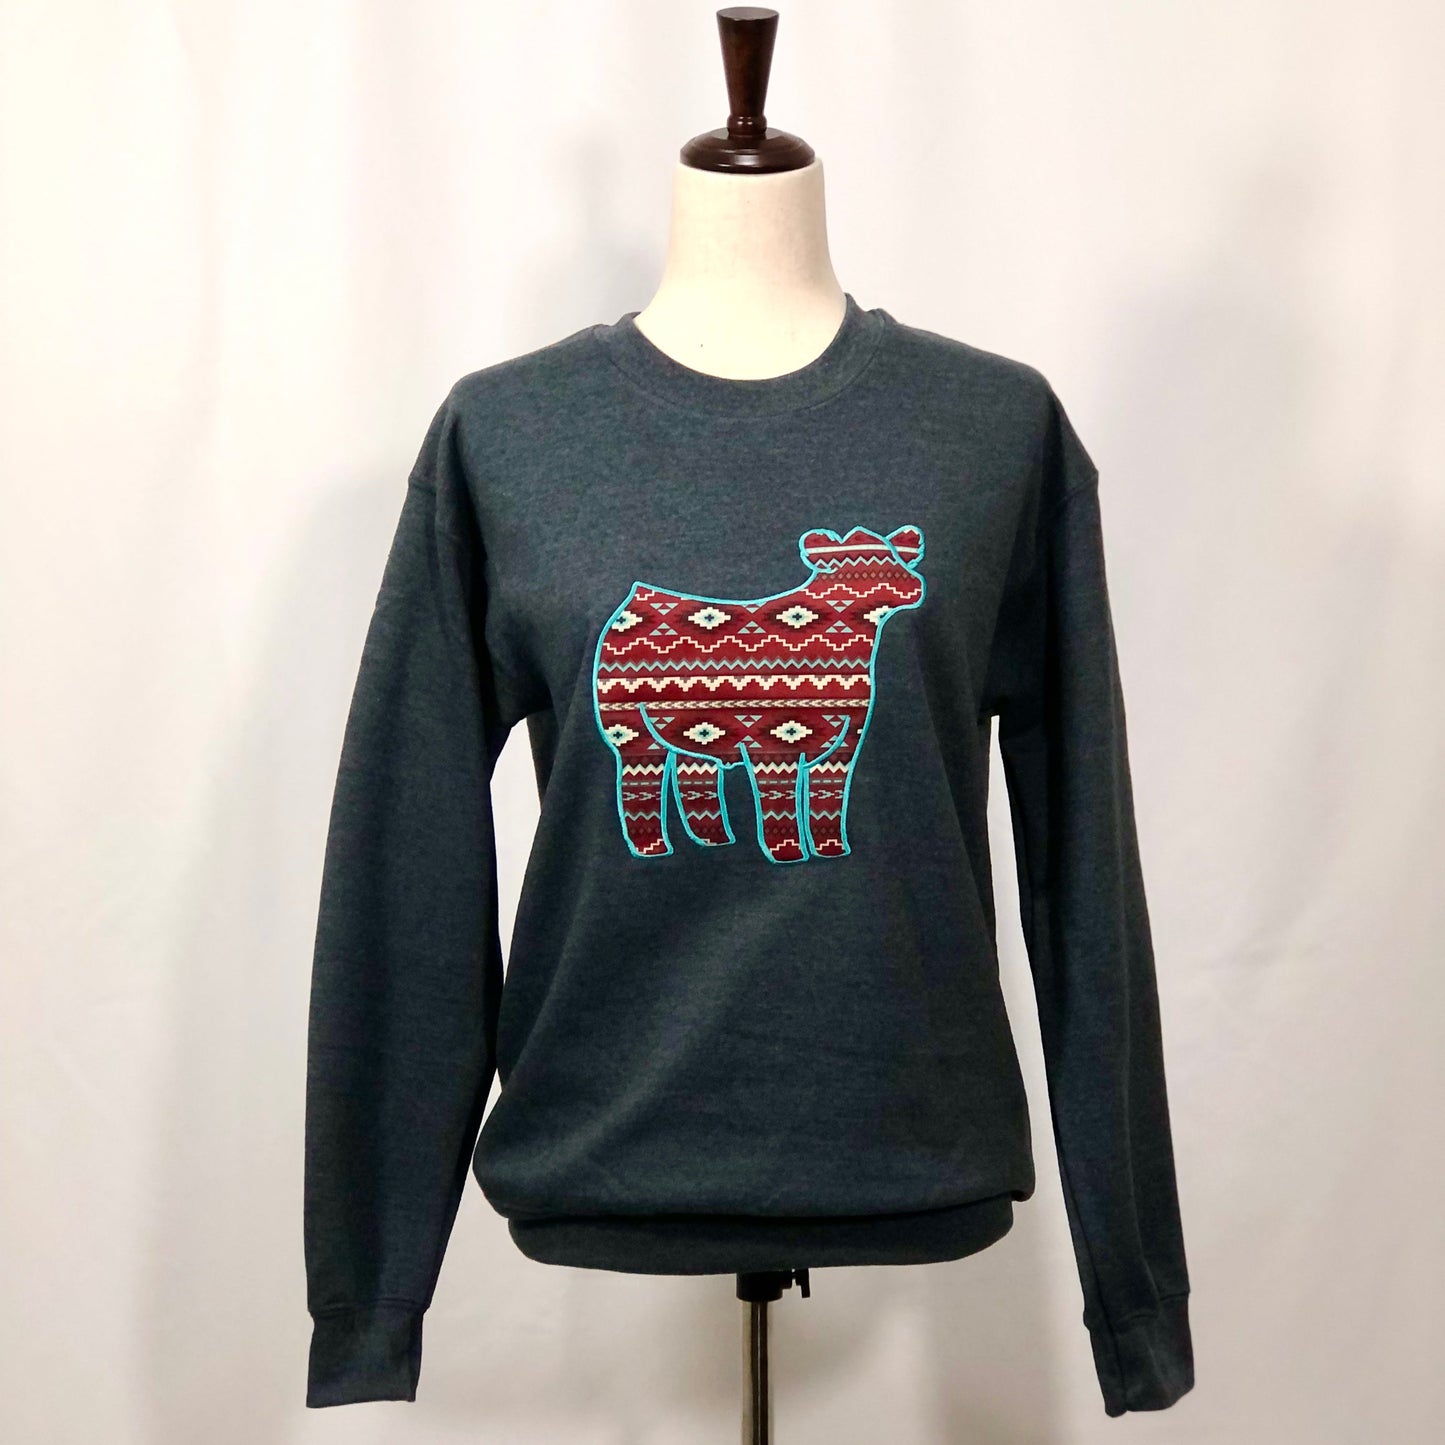 Aztec Show Steer Embroidered Crewneck Shirts & Tops Gone Rogue Boutique and Embroidery 